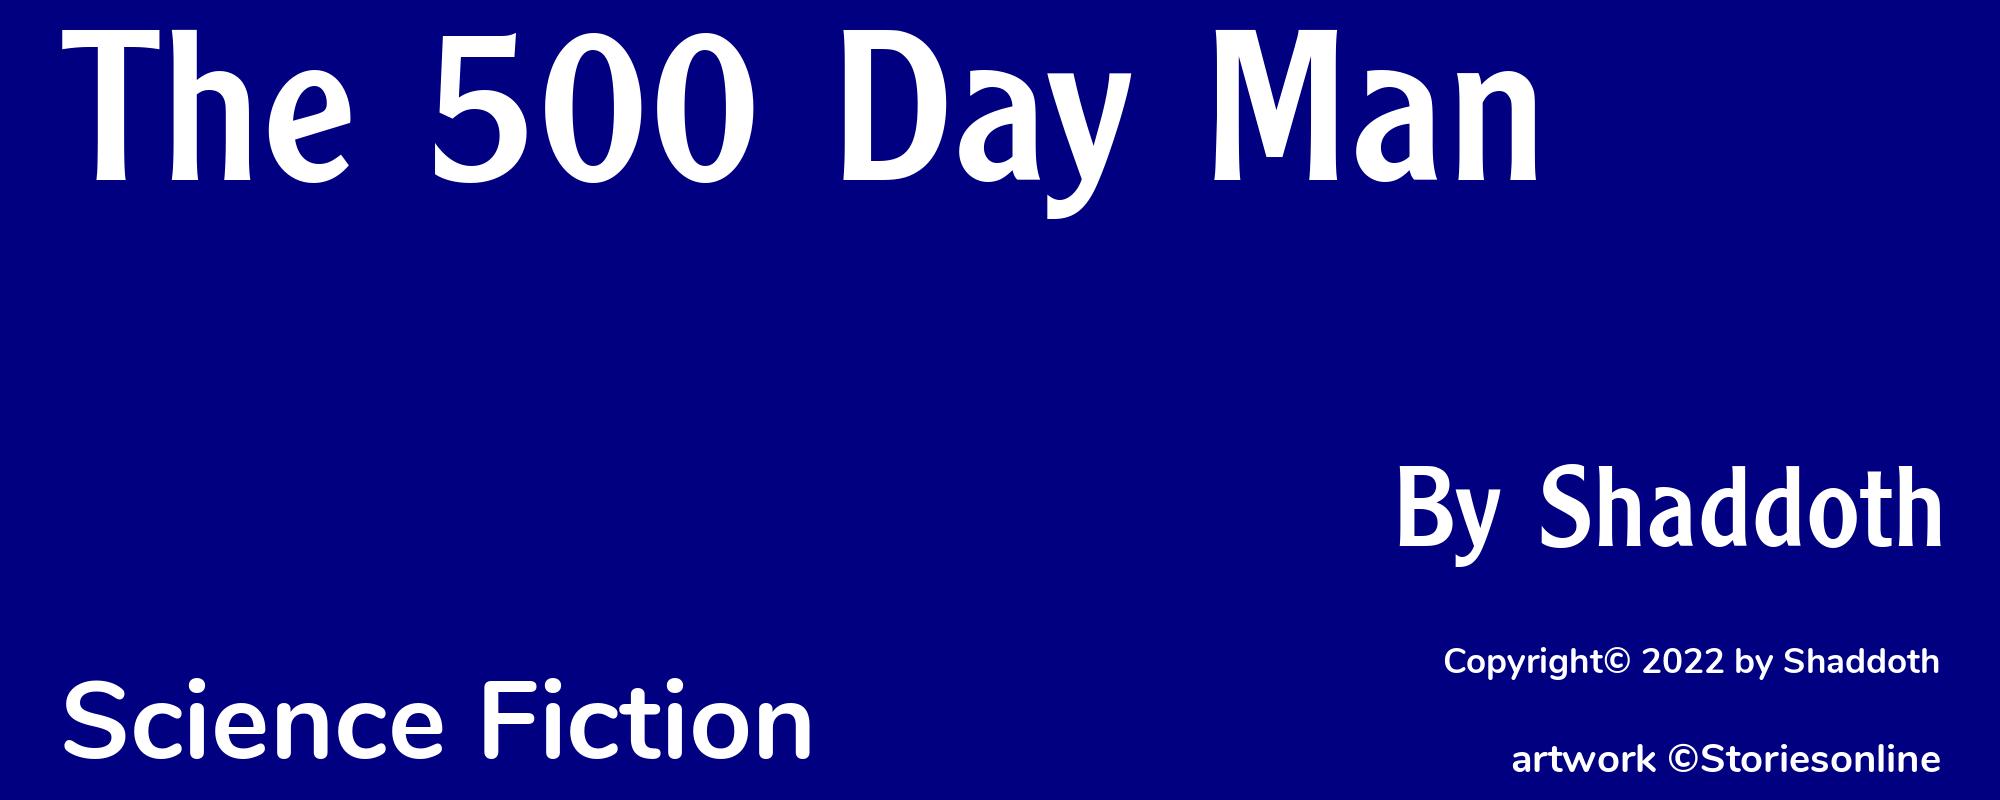 The 500 Day Man - Cover